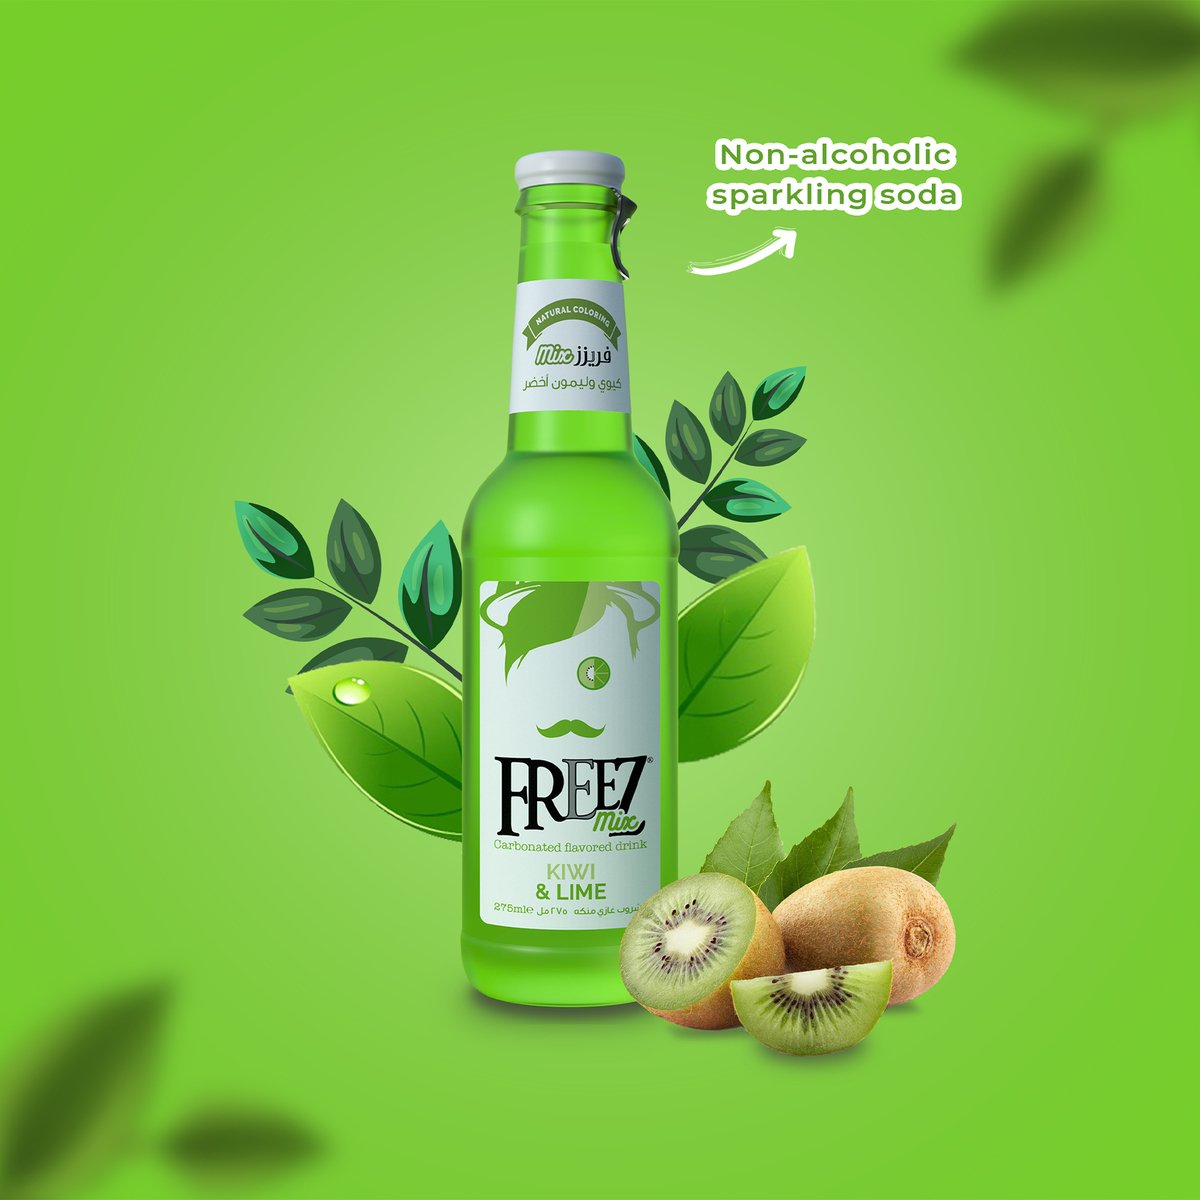 Freez Mix Kiwi & Lime Carbonated Flavoured Drink 275 ml